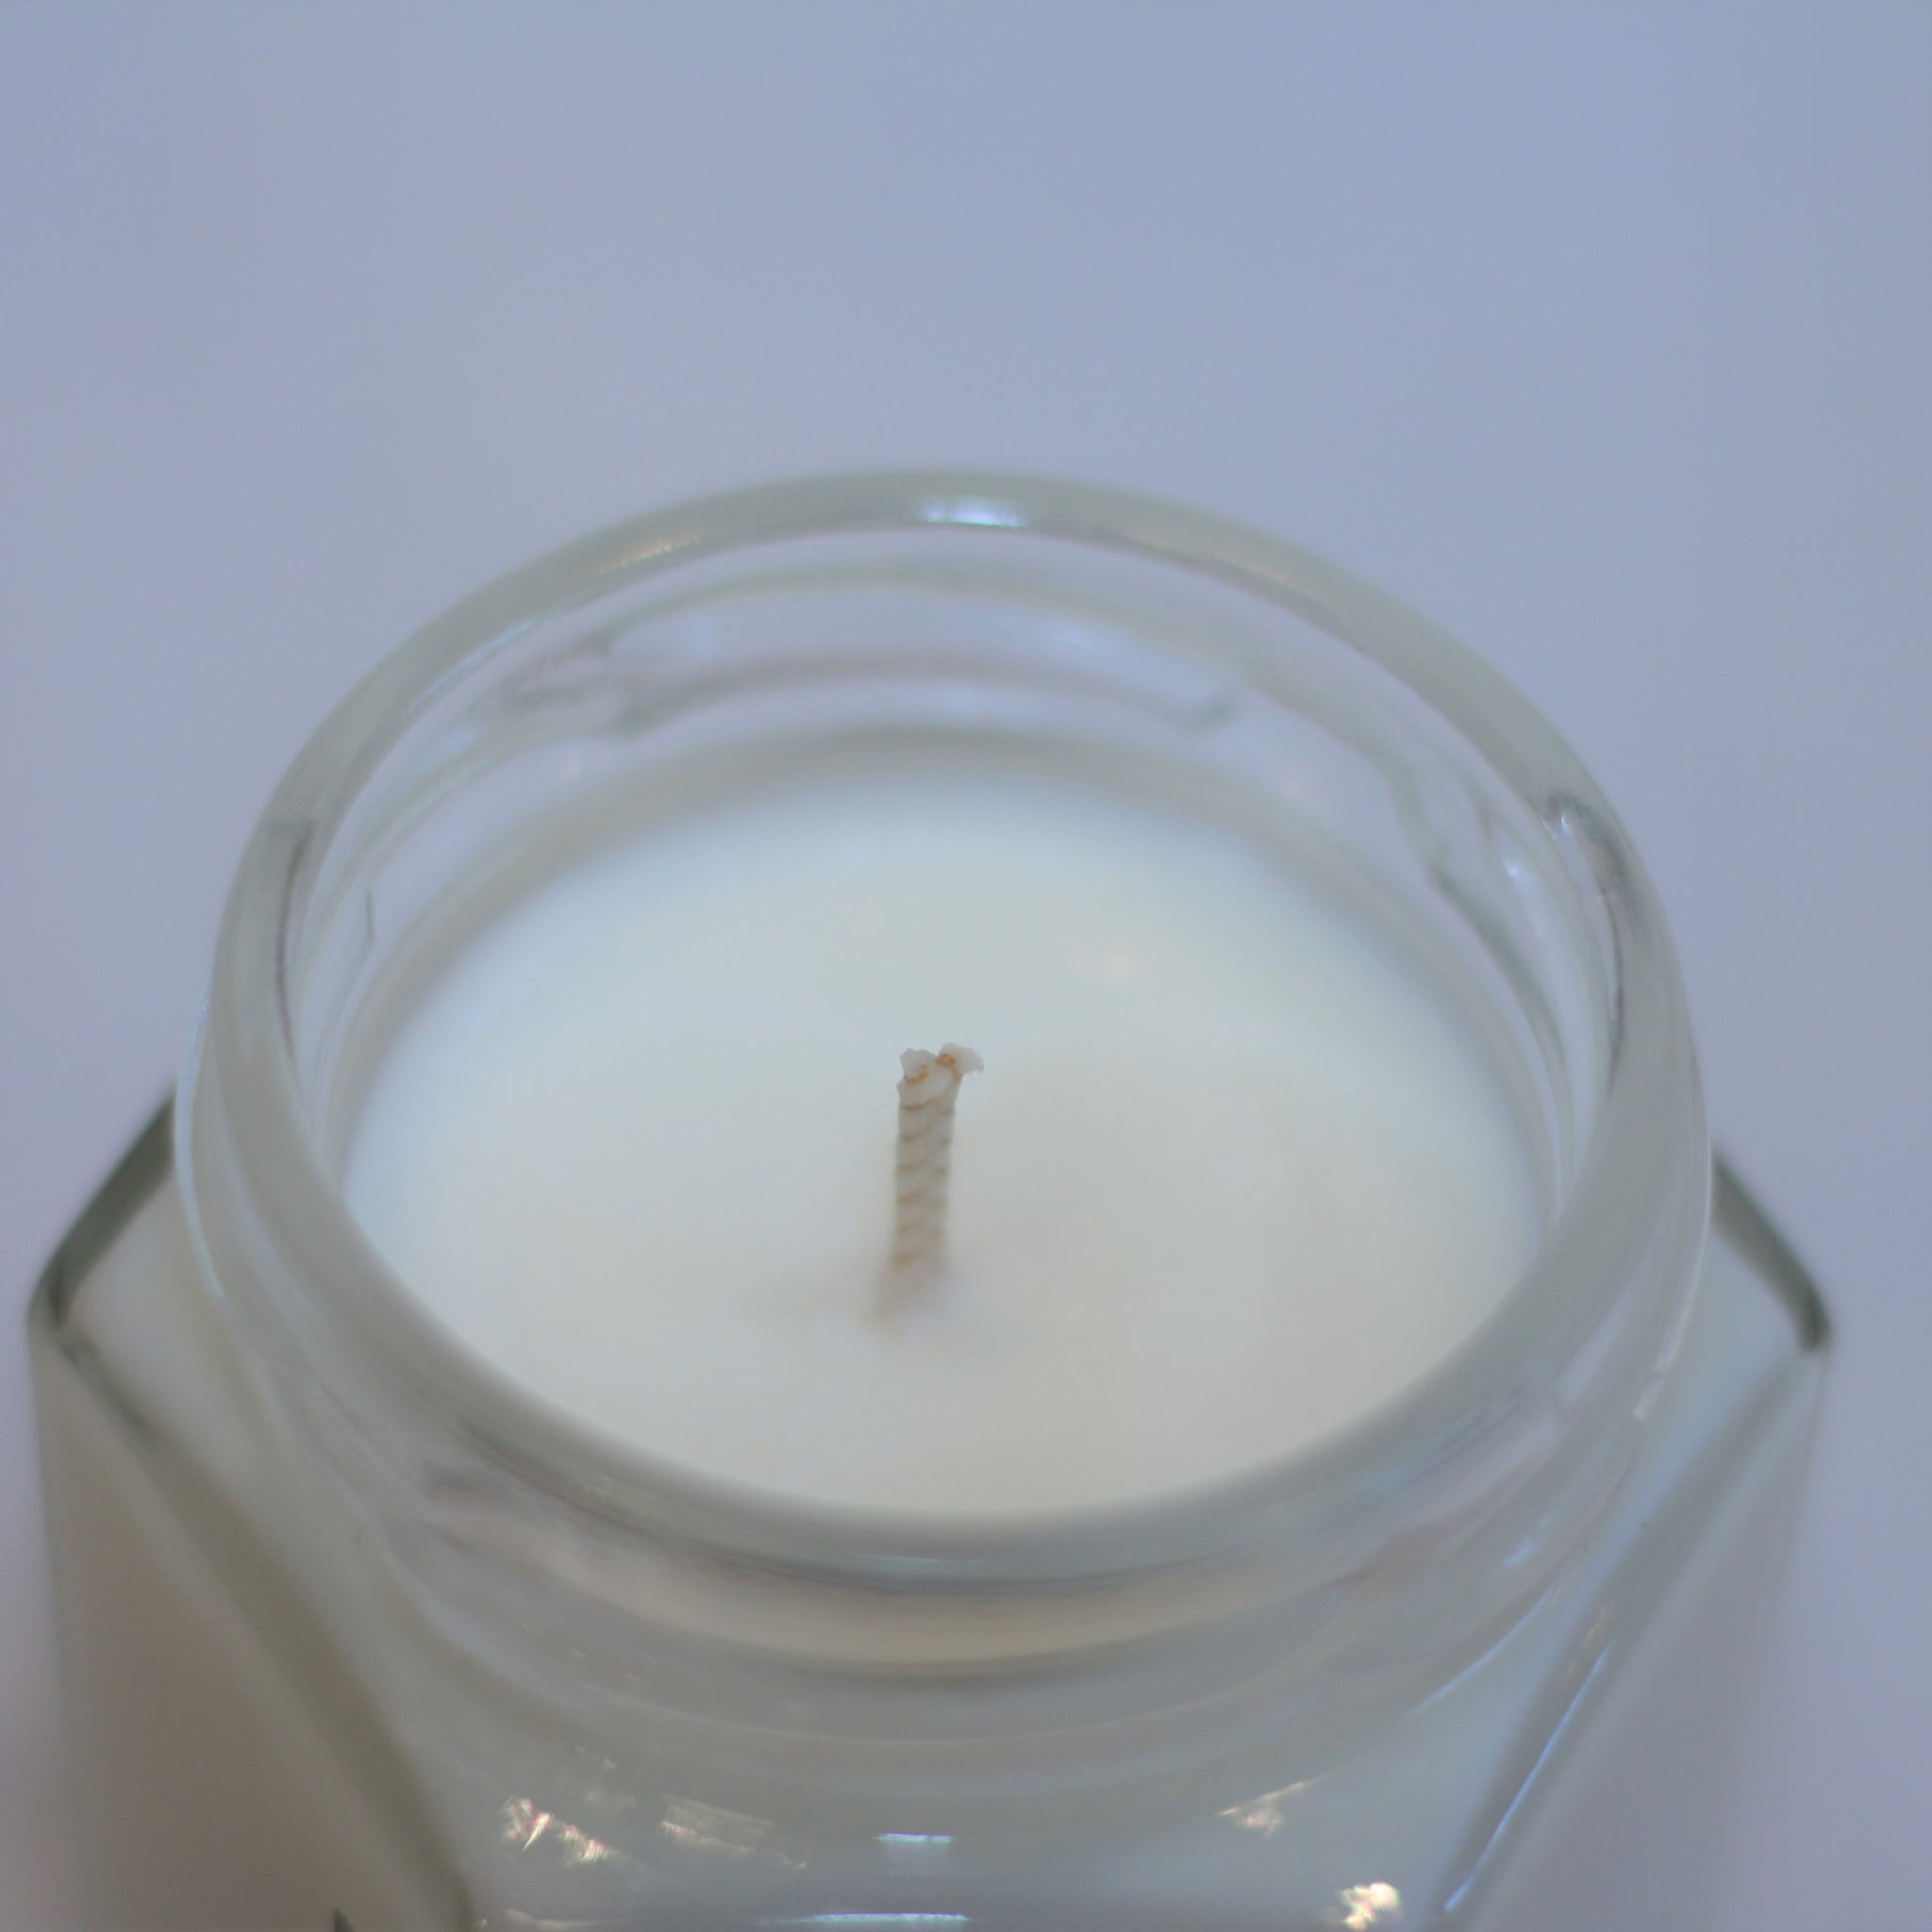 Peppermint Eucalyptus | Handpoured Soy Wax Candle